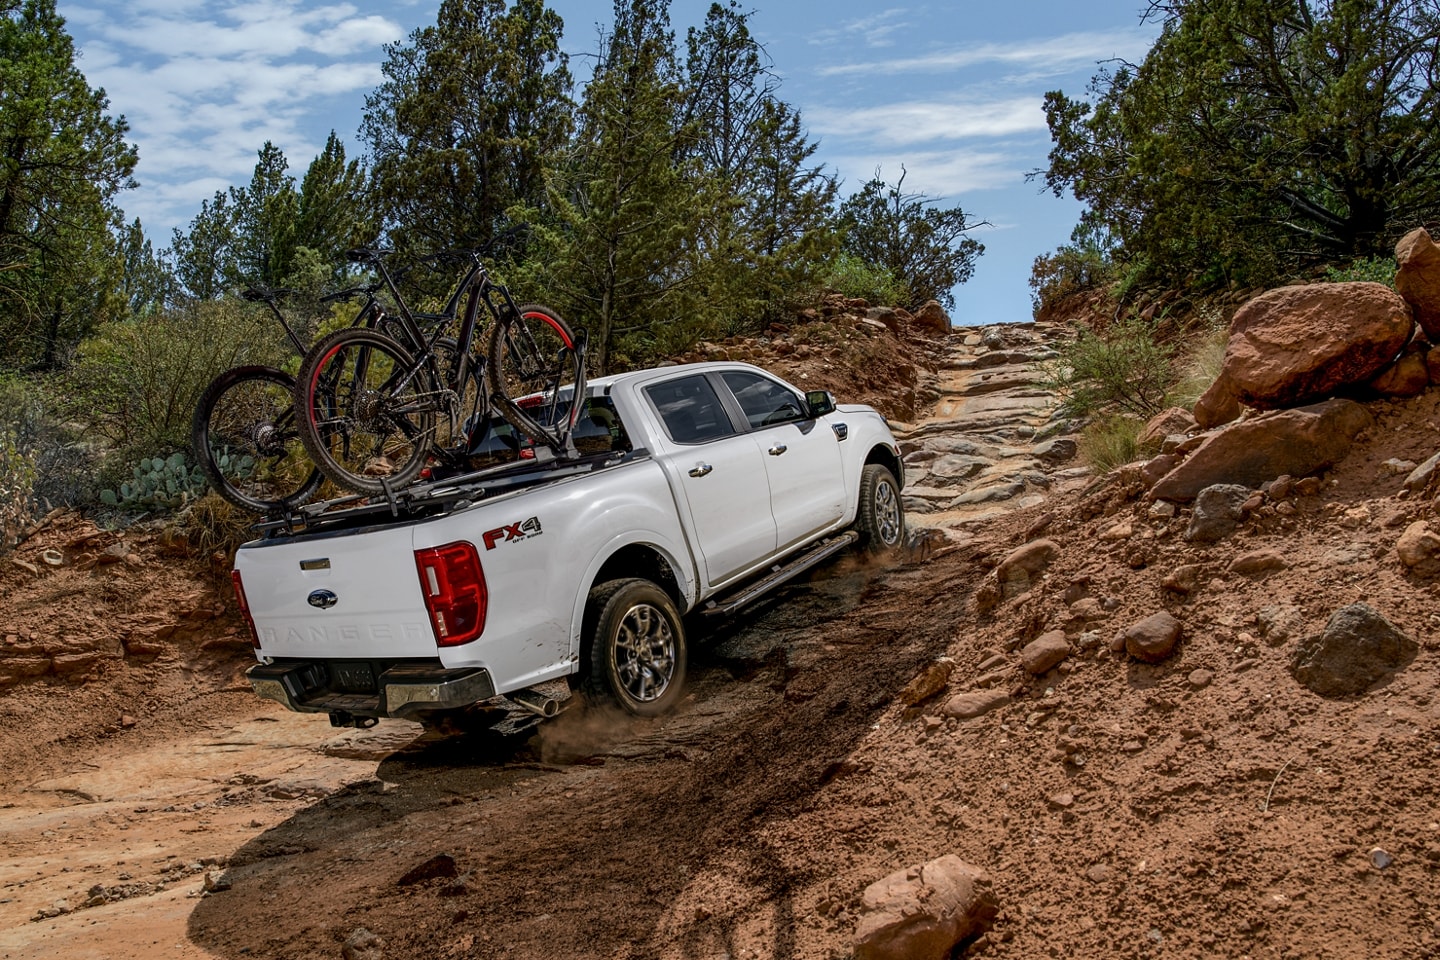 The 2022 Ford Ranger is a mid-size truck that is ready to handle off-road situations.